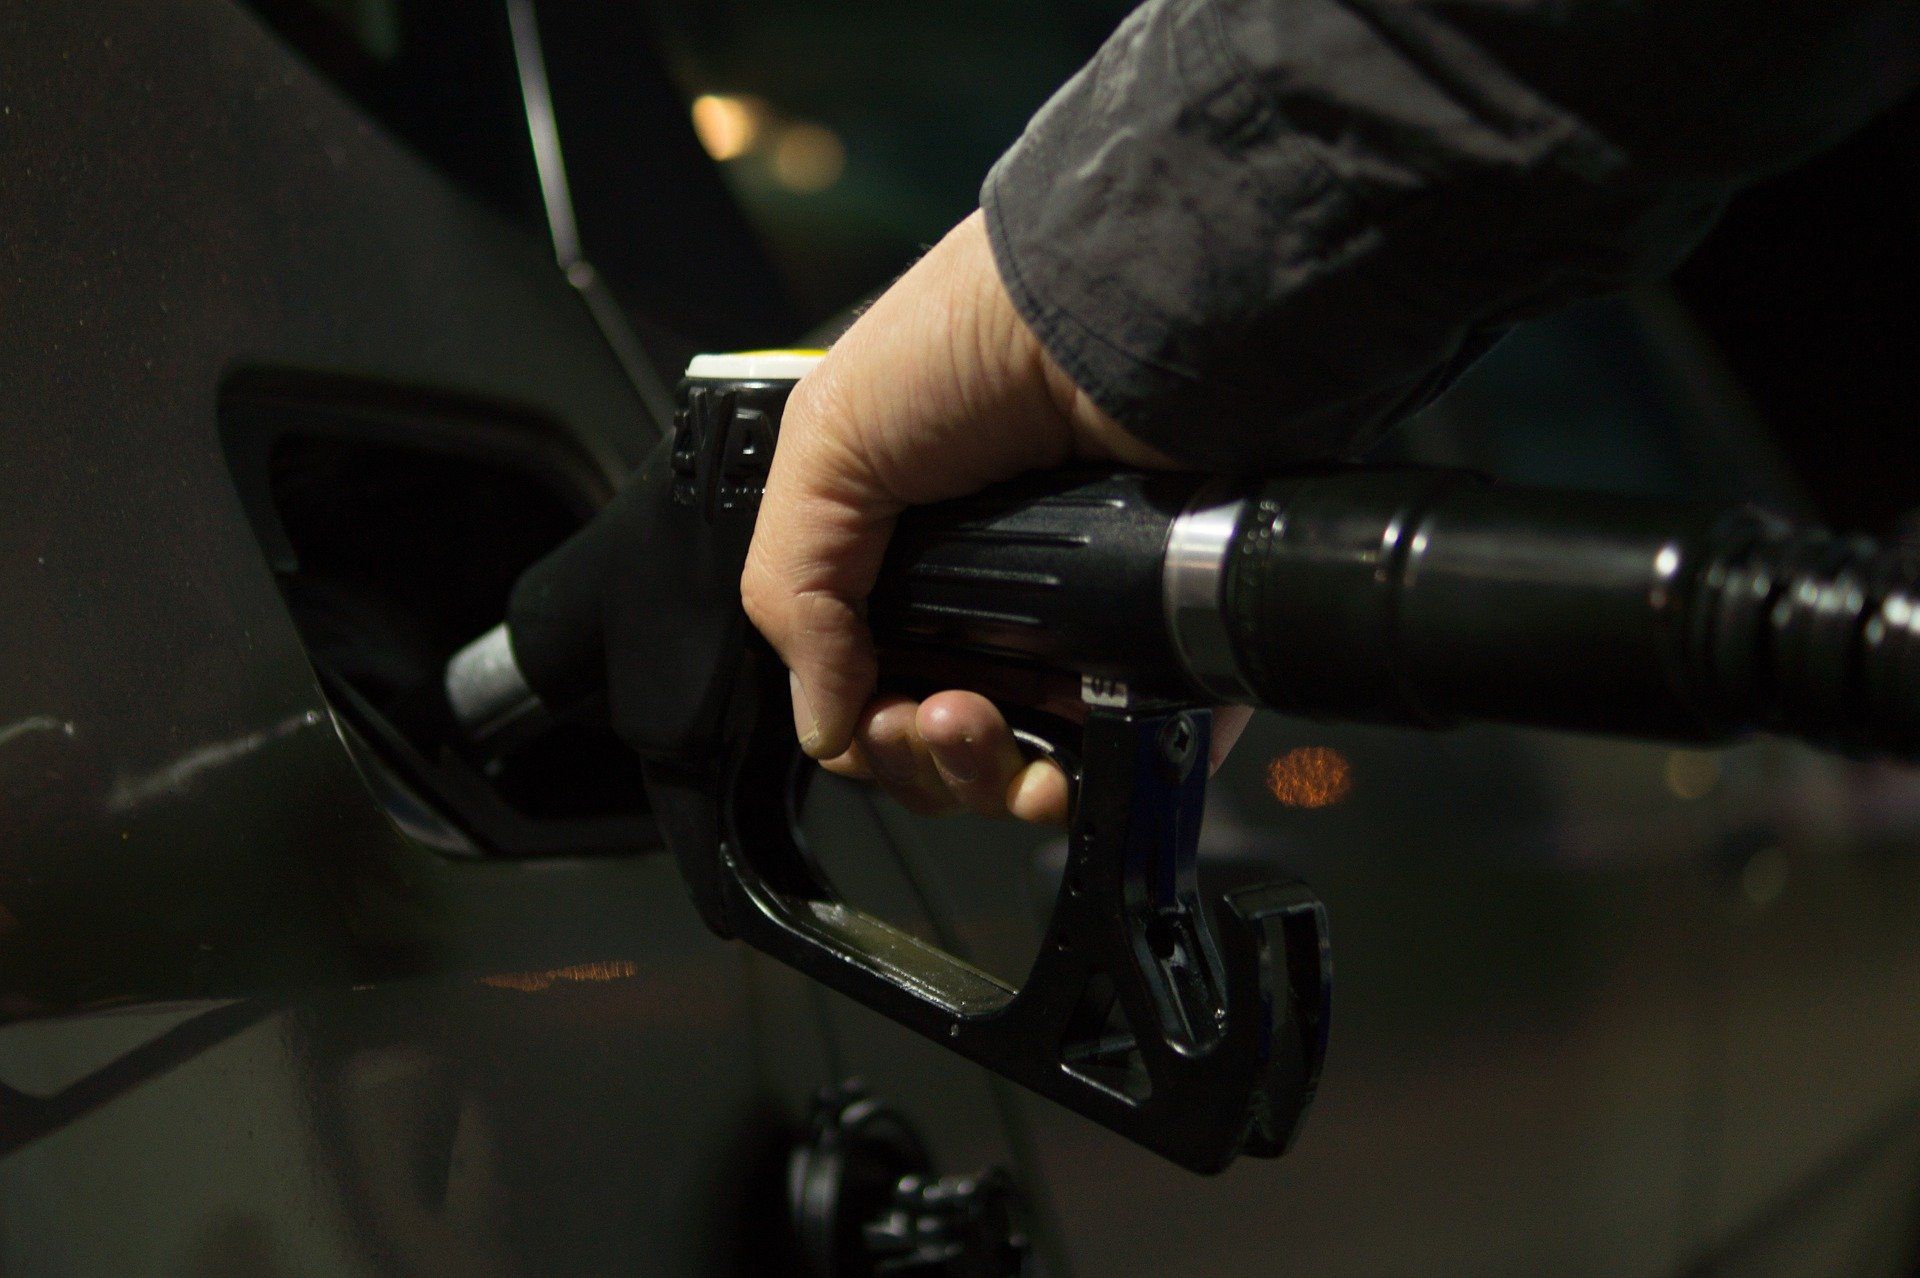 Fuel prices today: Petrol priced at Rs 95.41, diesel Rs 86.67 in Delhi on January 11, 2022